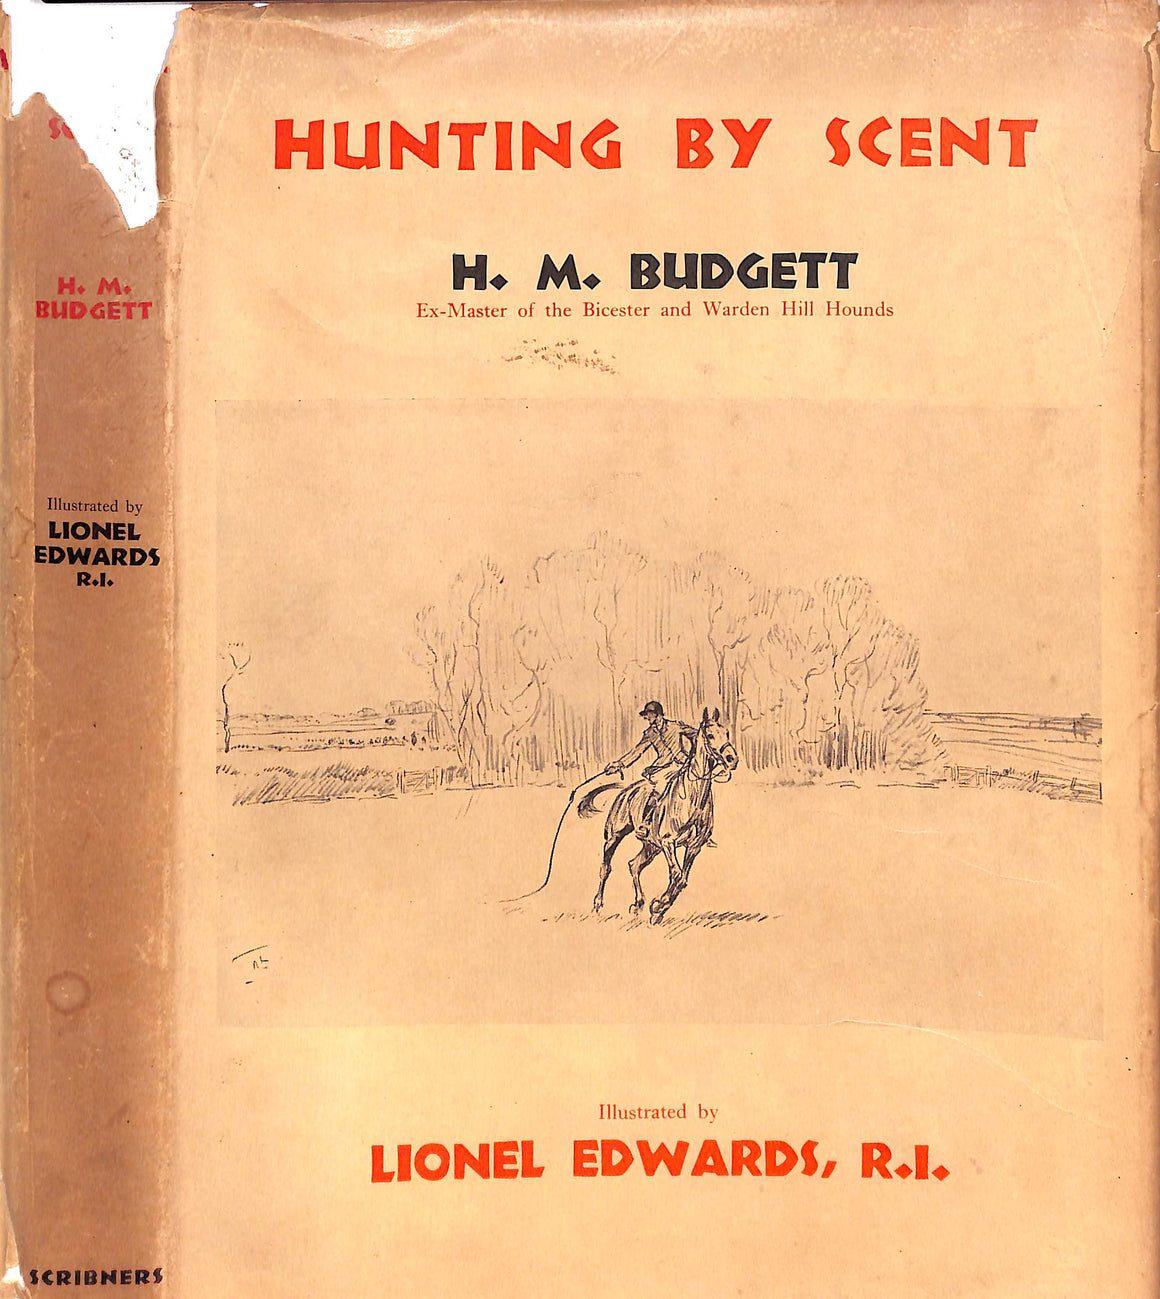 "Hunting By Scent" 1937 BUDGETT, H.M. (SOLD)